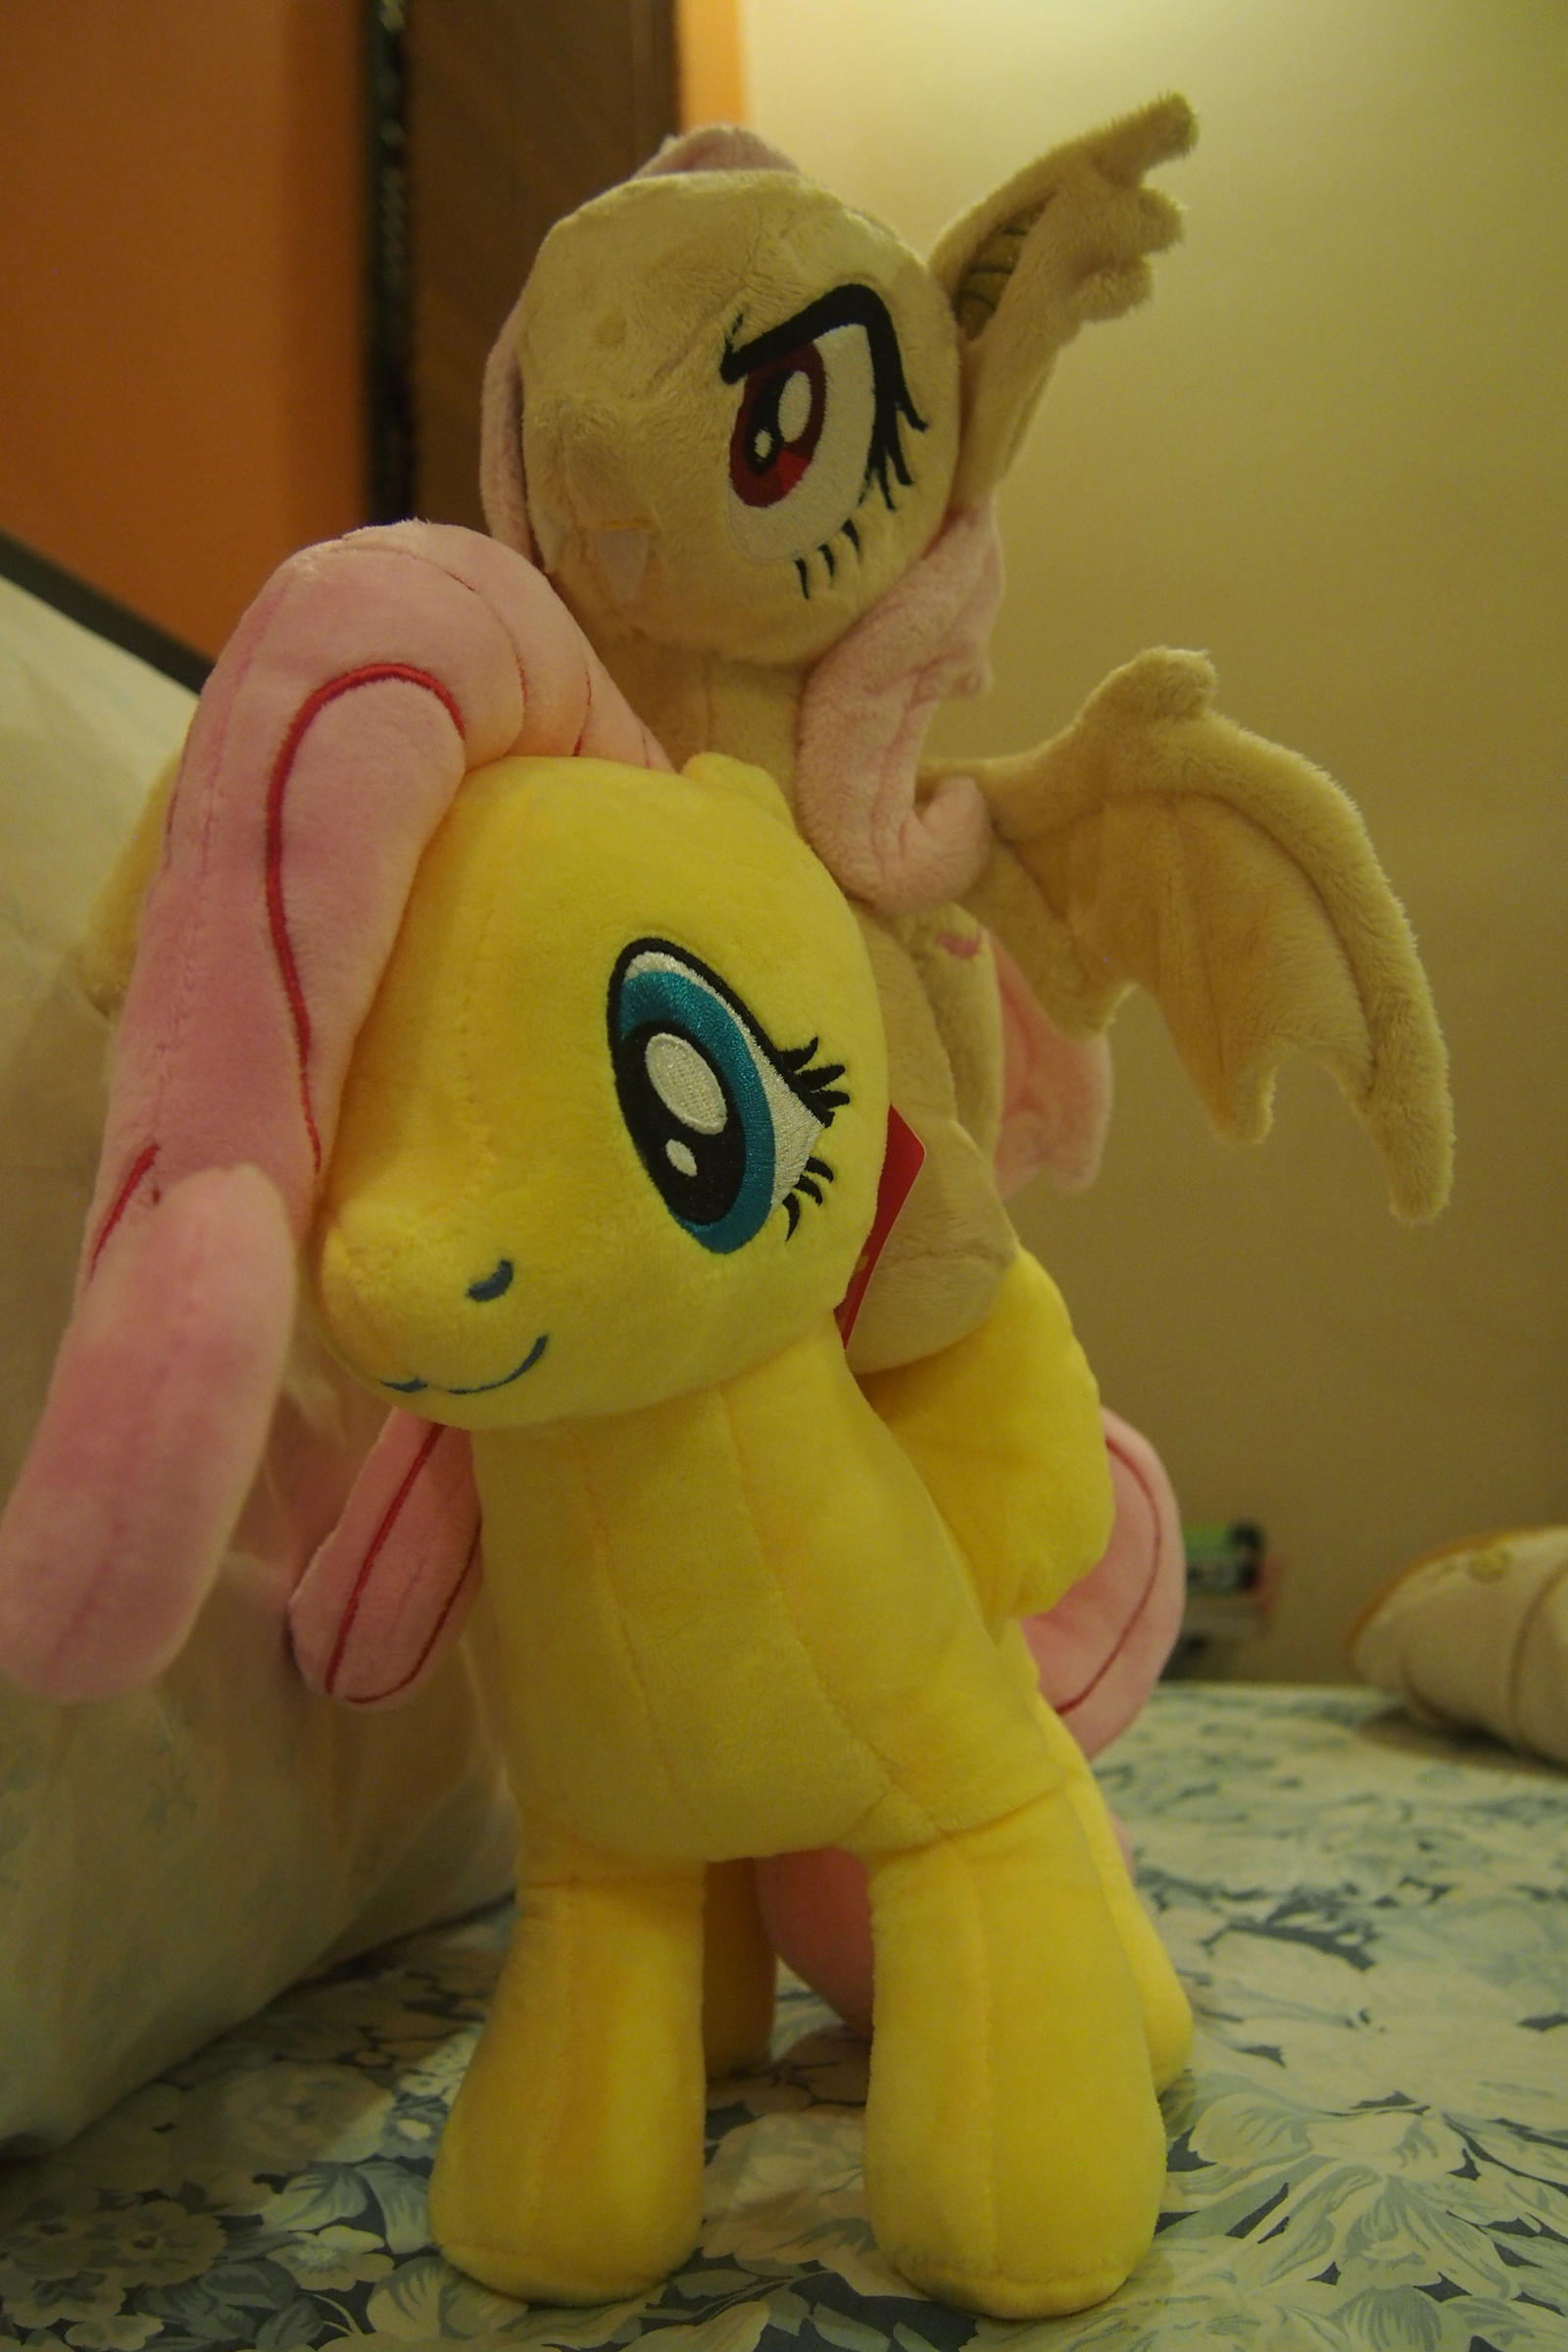 Fluttershy giving her baby sis a ride